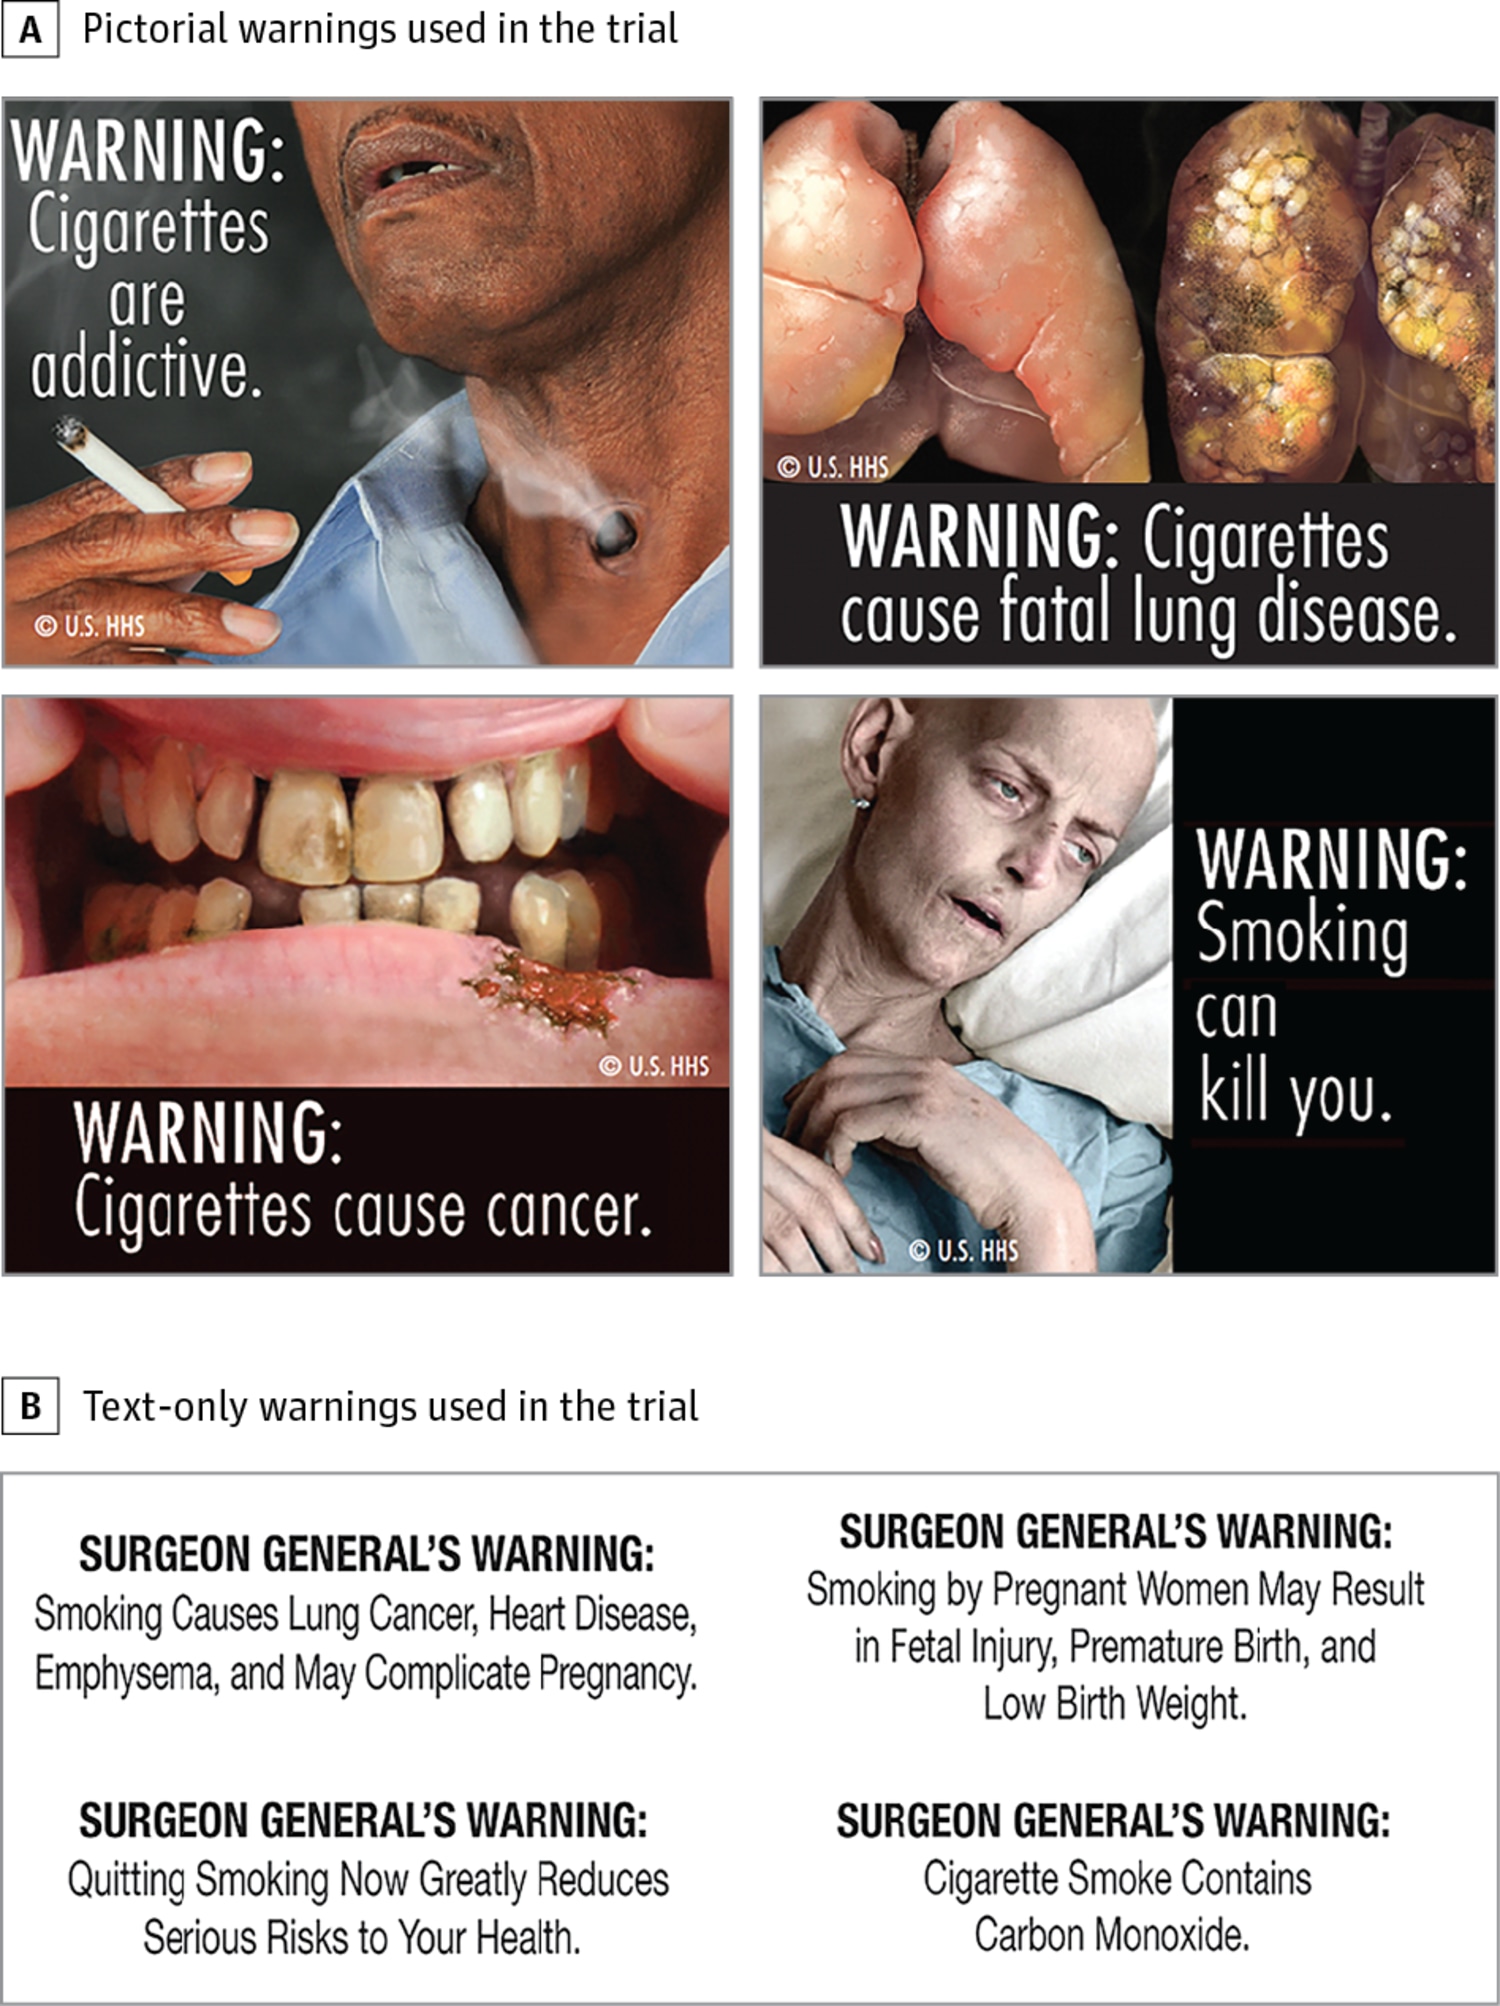 Pictures Better Than Words For Scaring Smokers off Cigarettes